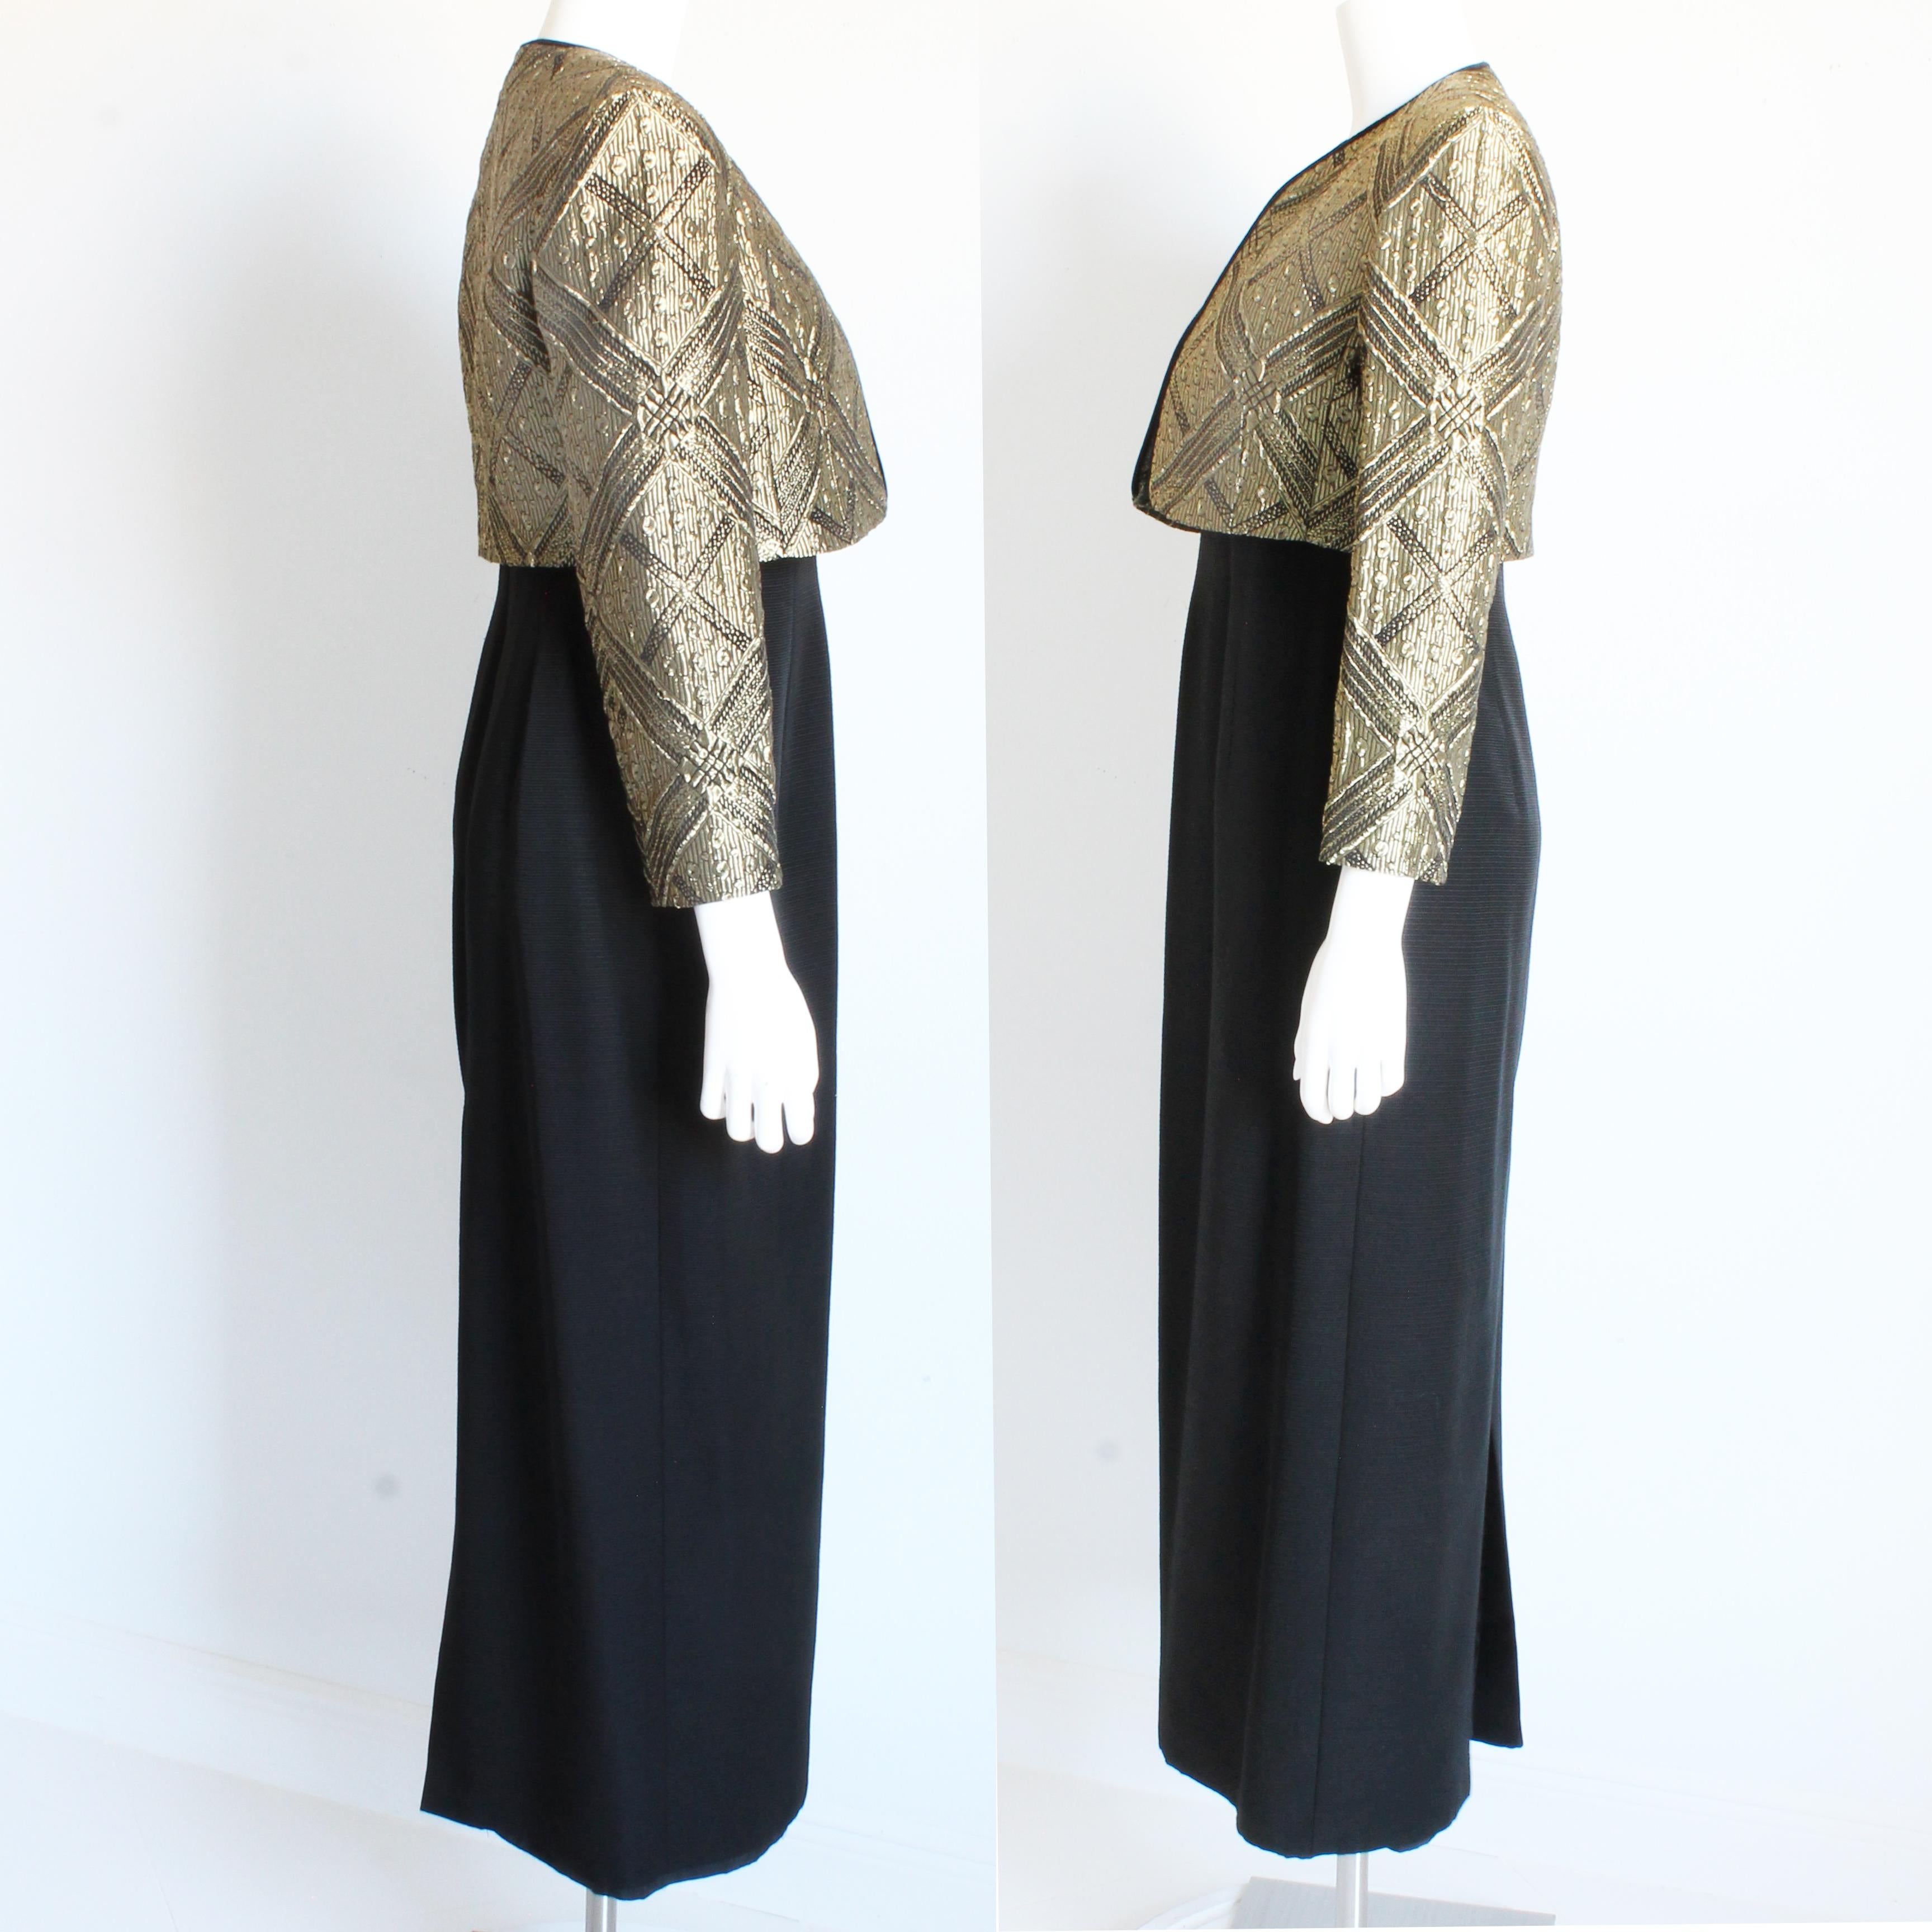 Louis Feraud Evening Gown and Jacket 2pc Long Gold Metallic Brocade Vintage 90s  For Sale 4